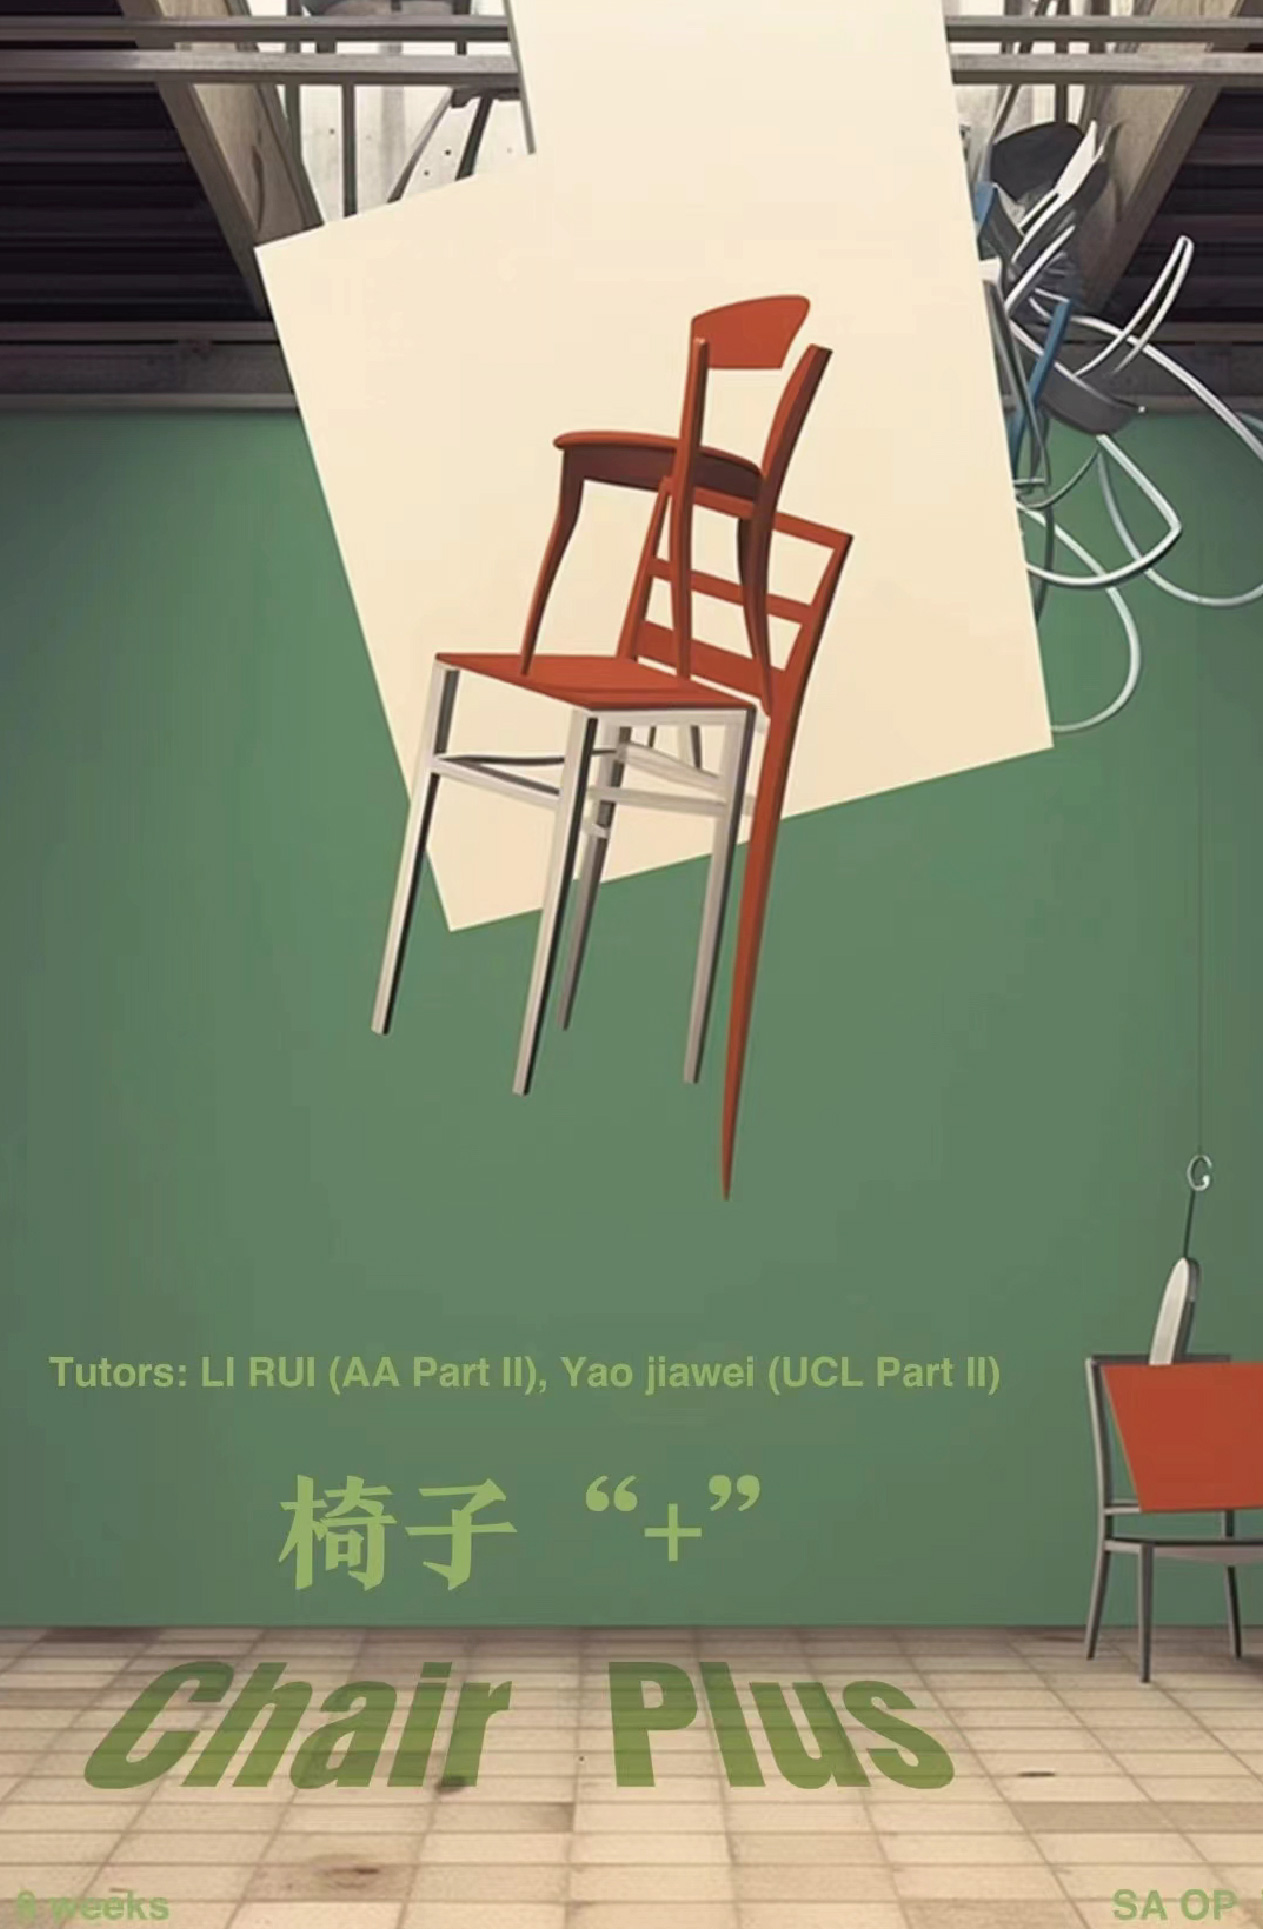 Chair Plus 椅子“+”